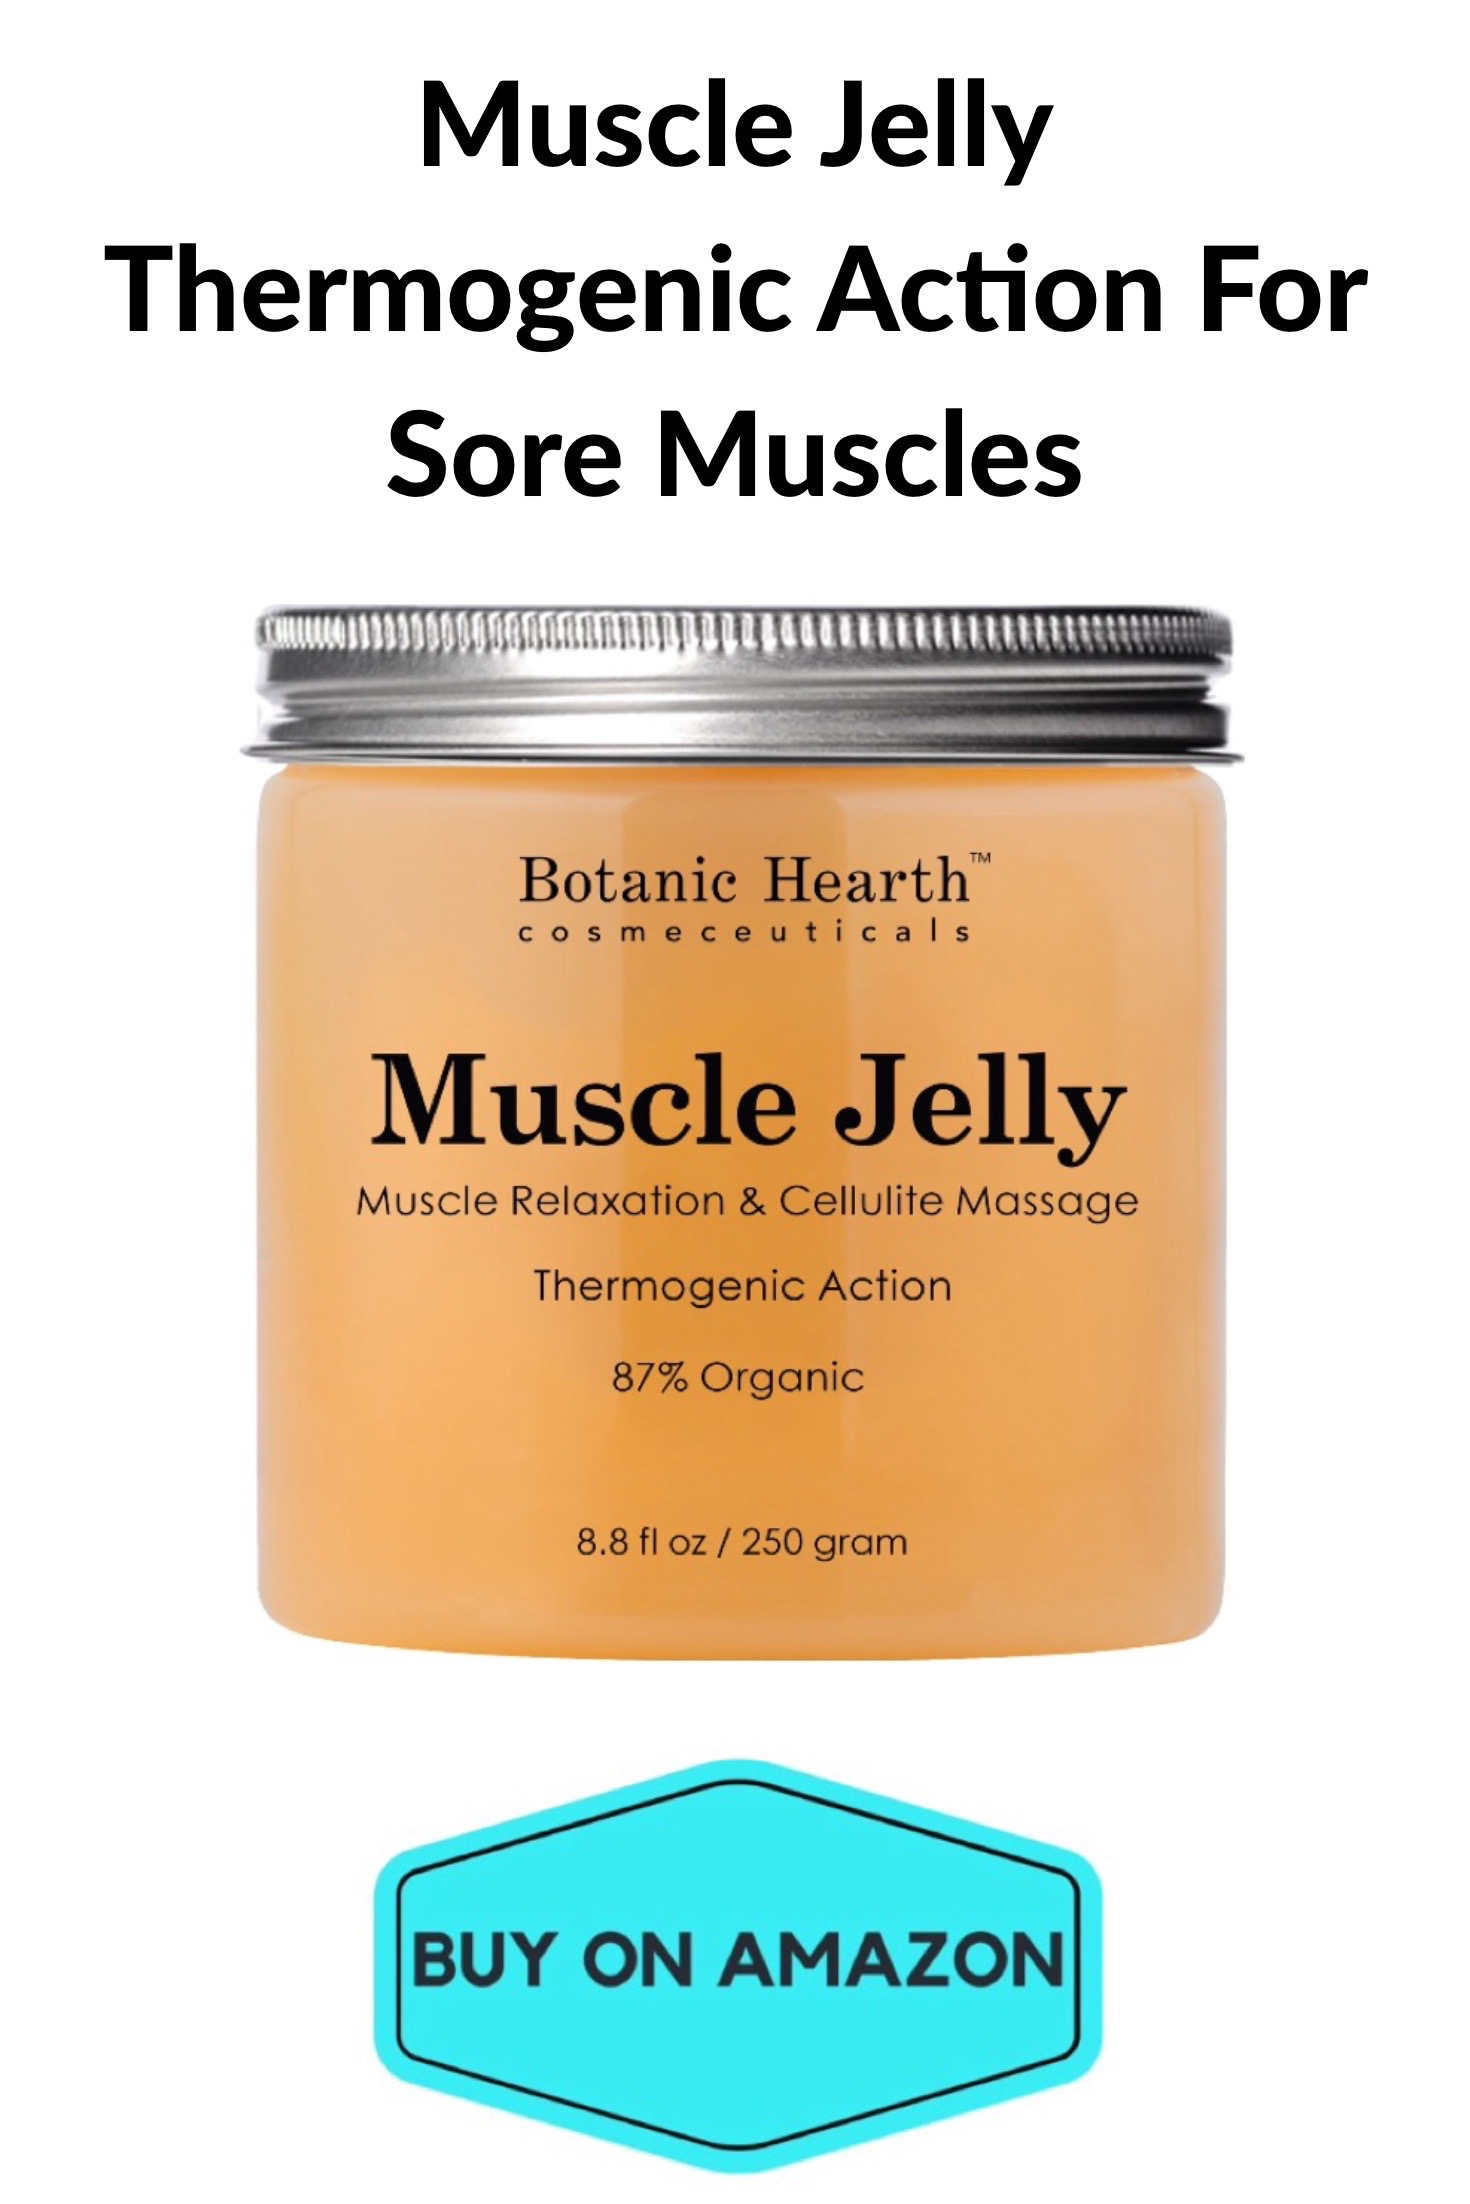 Muscle Jelly